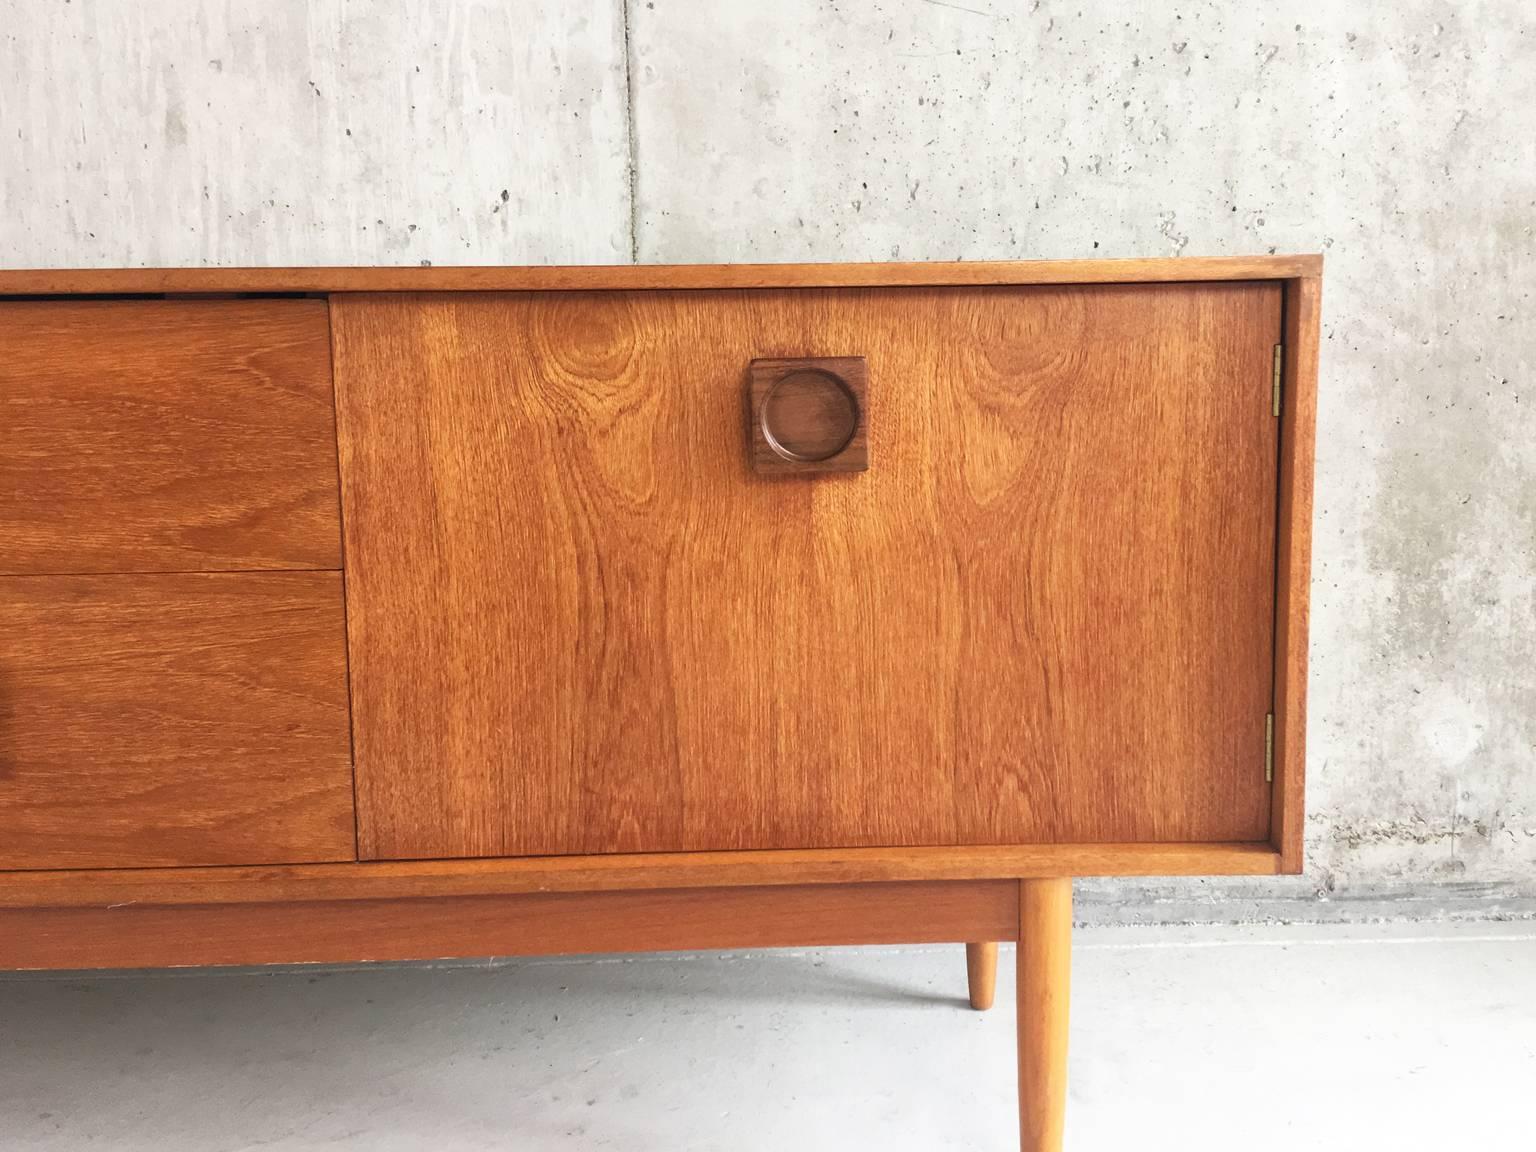 The fantastic wood grain makes this piece outstanding. The design is simple, minimal and elegant with darker teak square handles with a round inset. The only fault is that the top middle drawer is not on a runner properly, when pulled out it stays